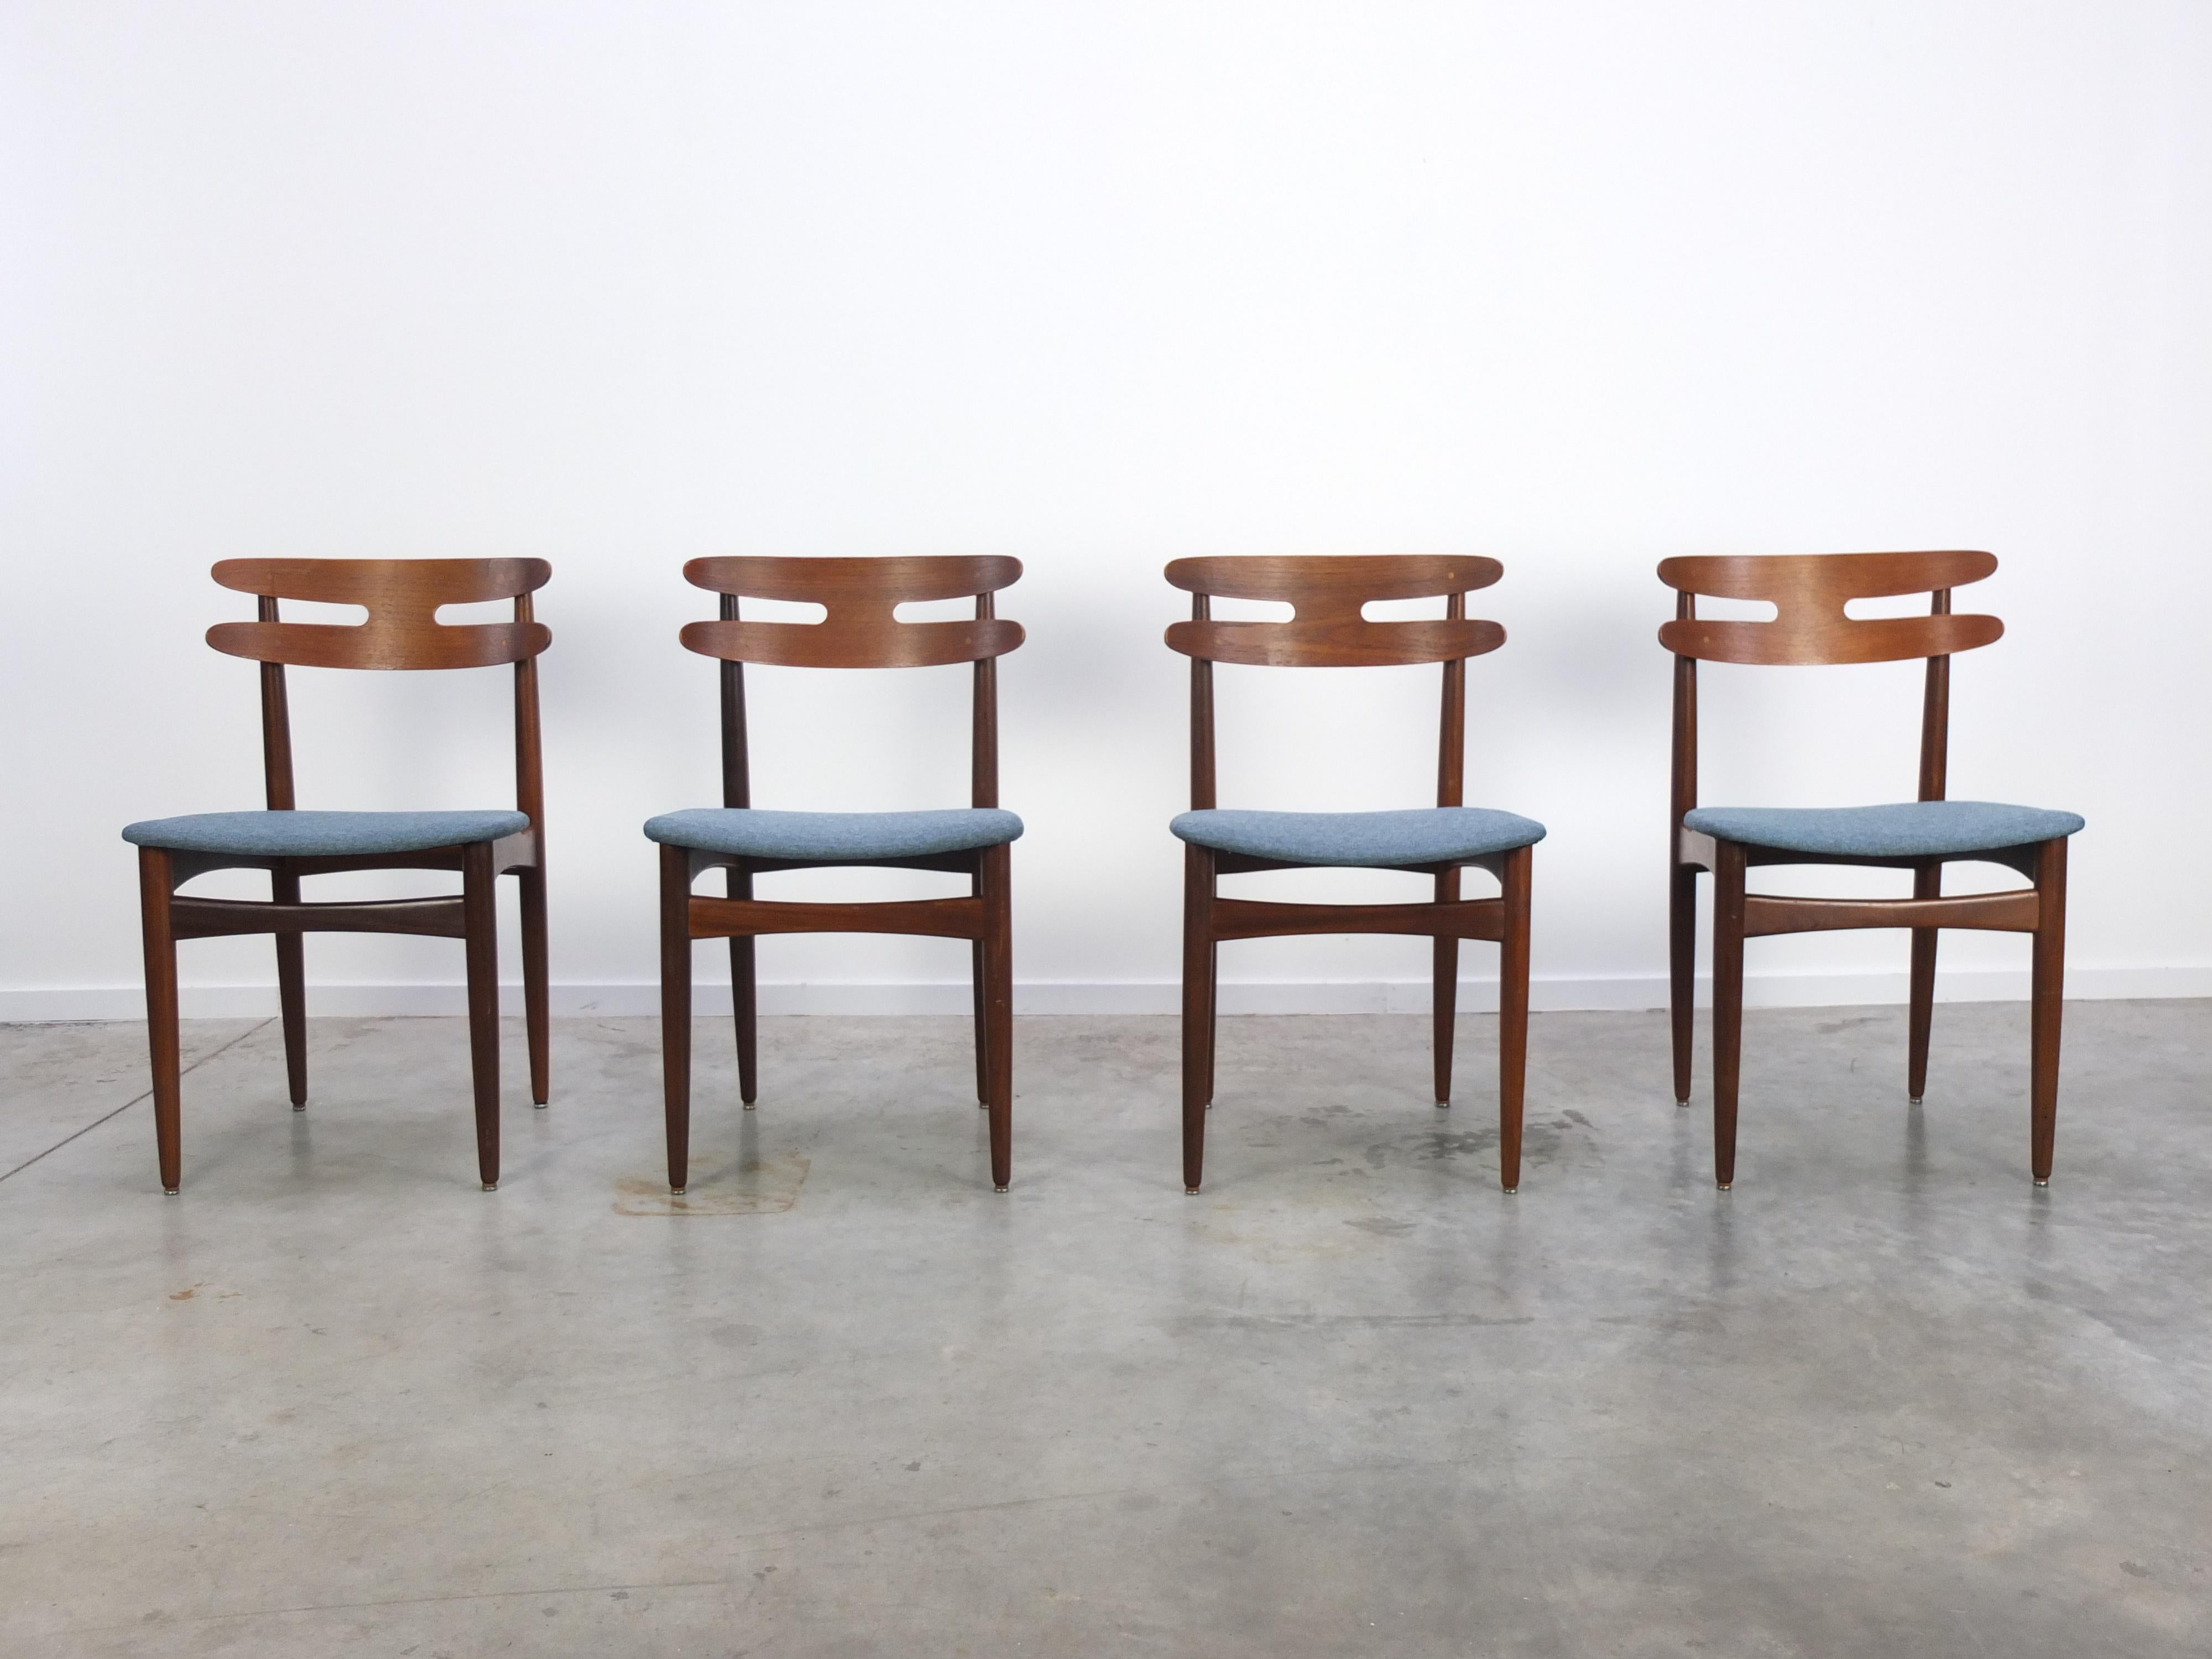 Beautiful set of 4 rare ‘Model 178’ dining chairs designed by Johannes Andersen for Bramin during the 1960s. Made of solid teak frames with very decorative sculptural backrests and visible brass joints. Reupholstered with a nice blue fabric so in